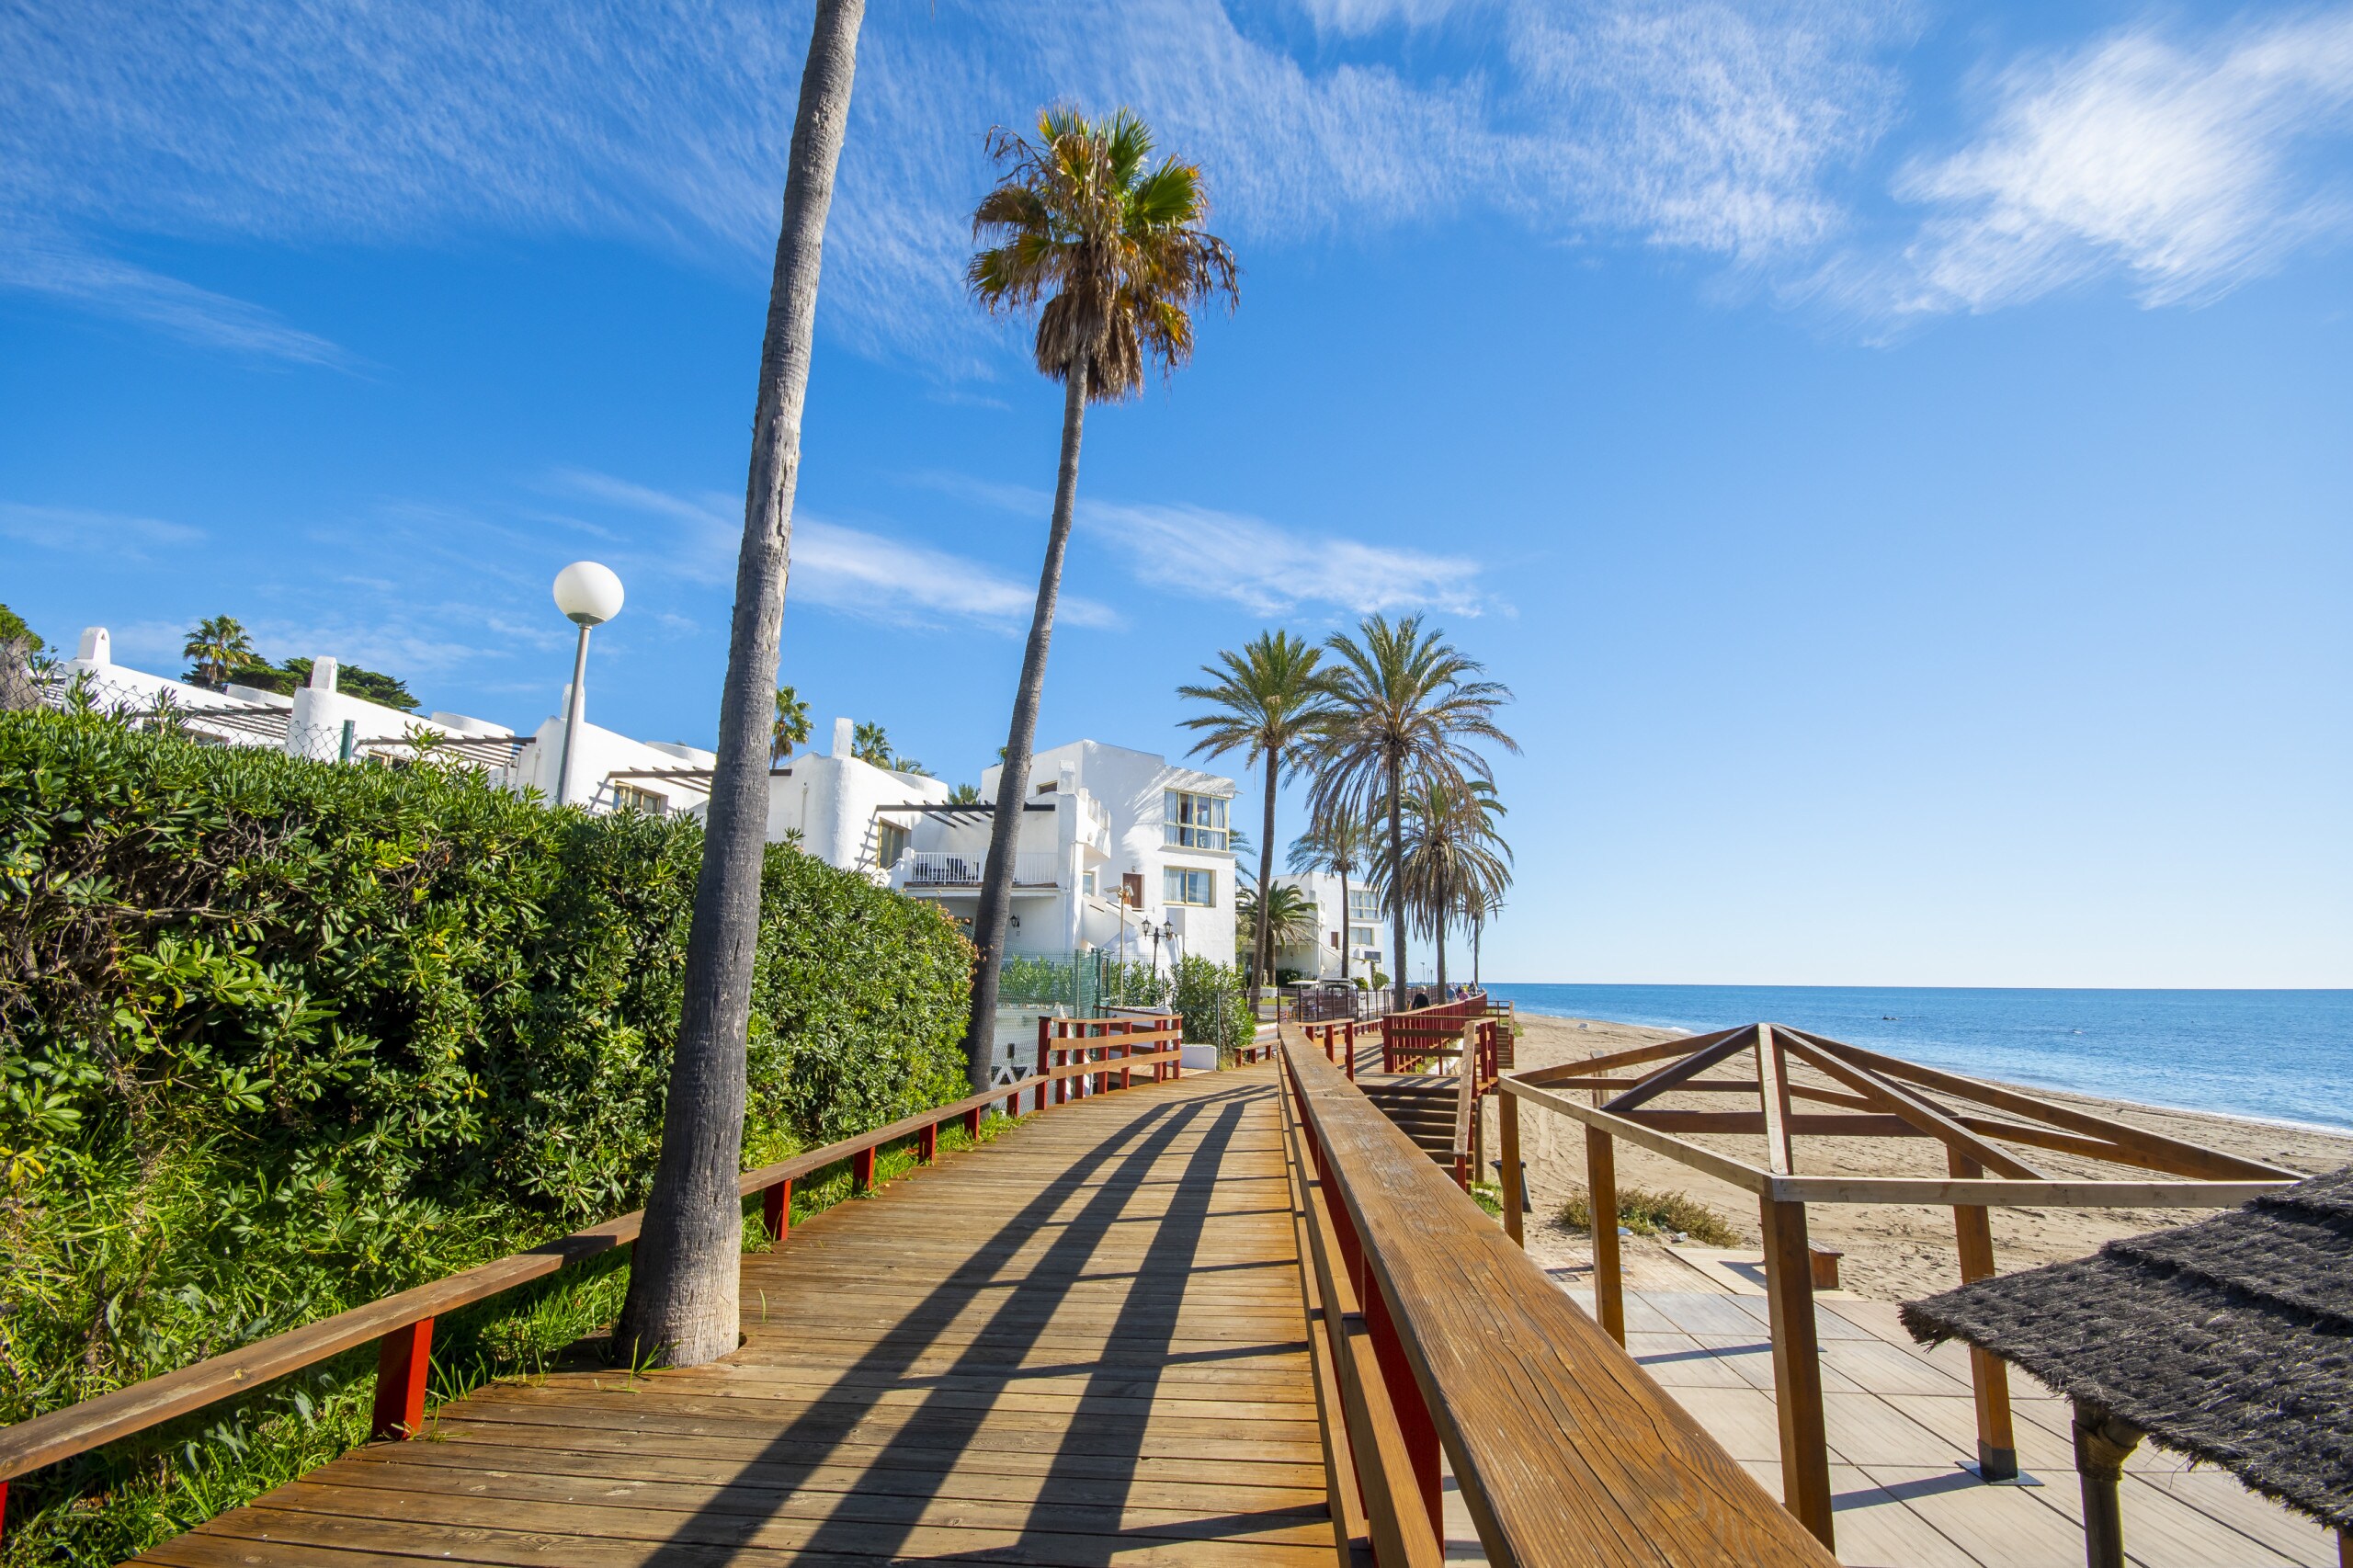 Enjoy the nearby beach of this apartment in Mijas Costa